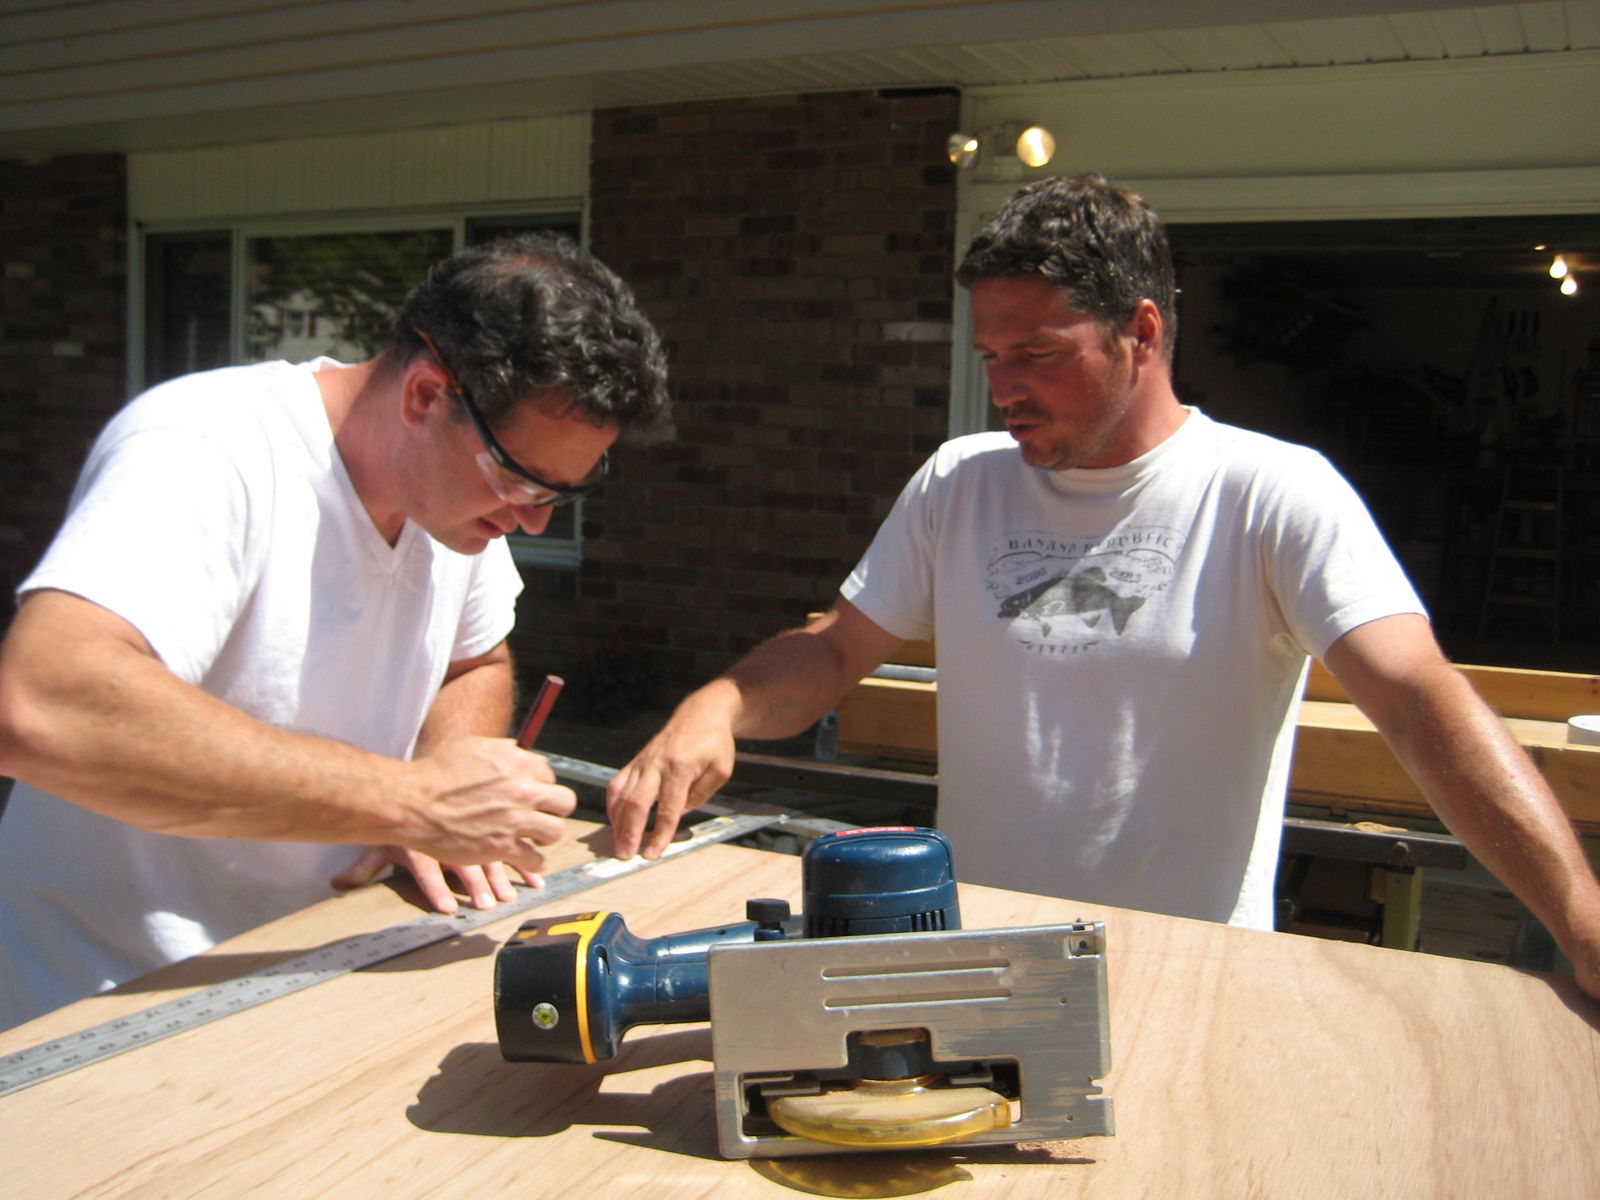 P 21
Billy and myself cutting the transom.
